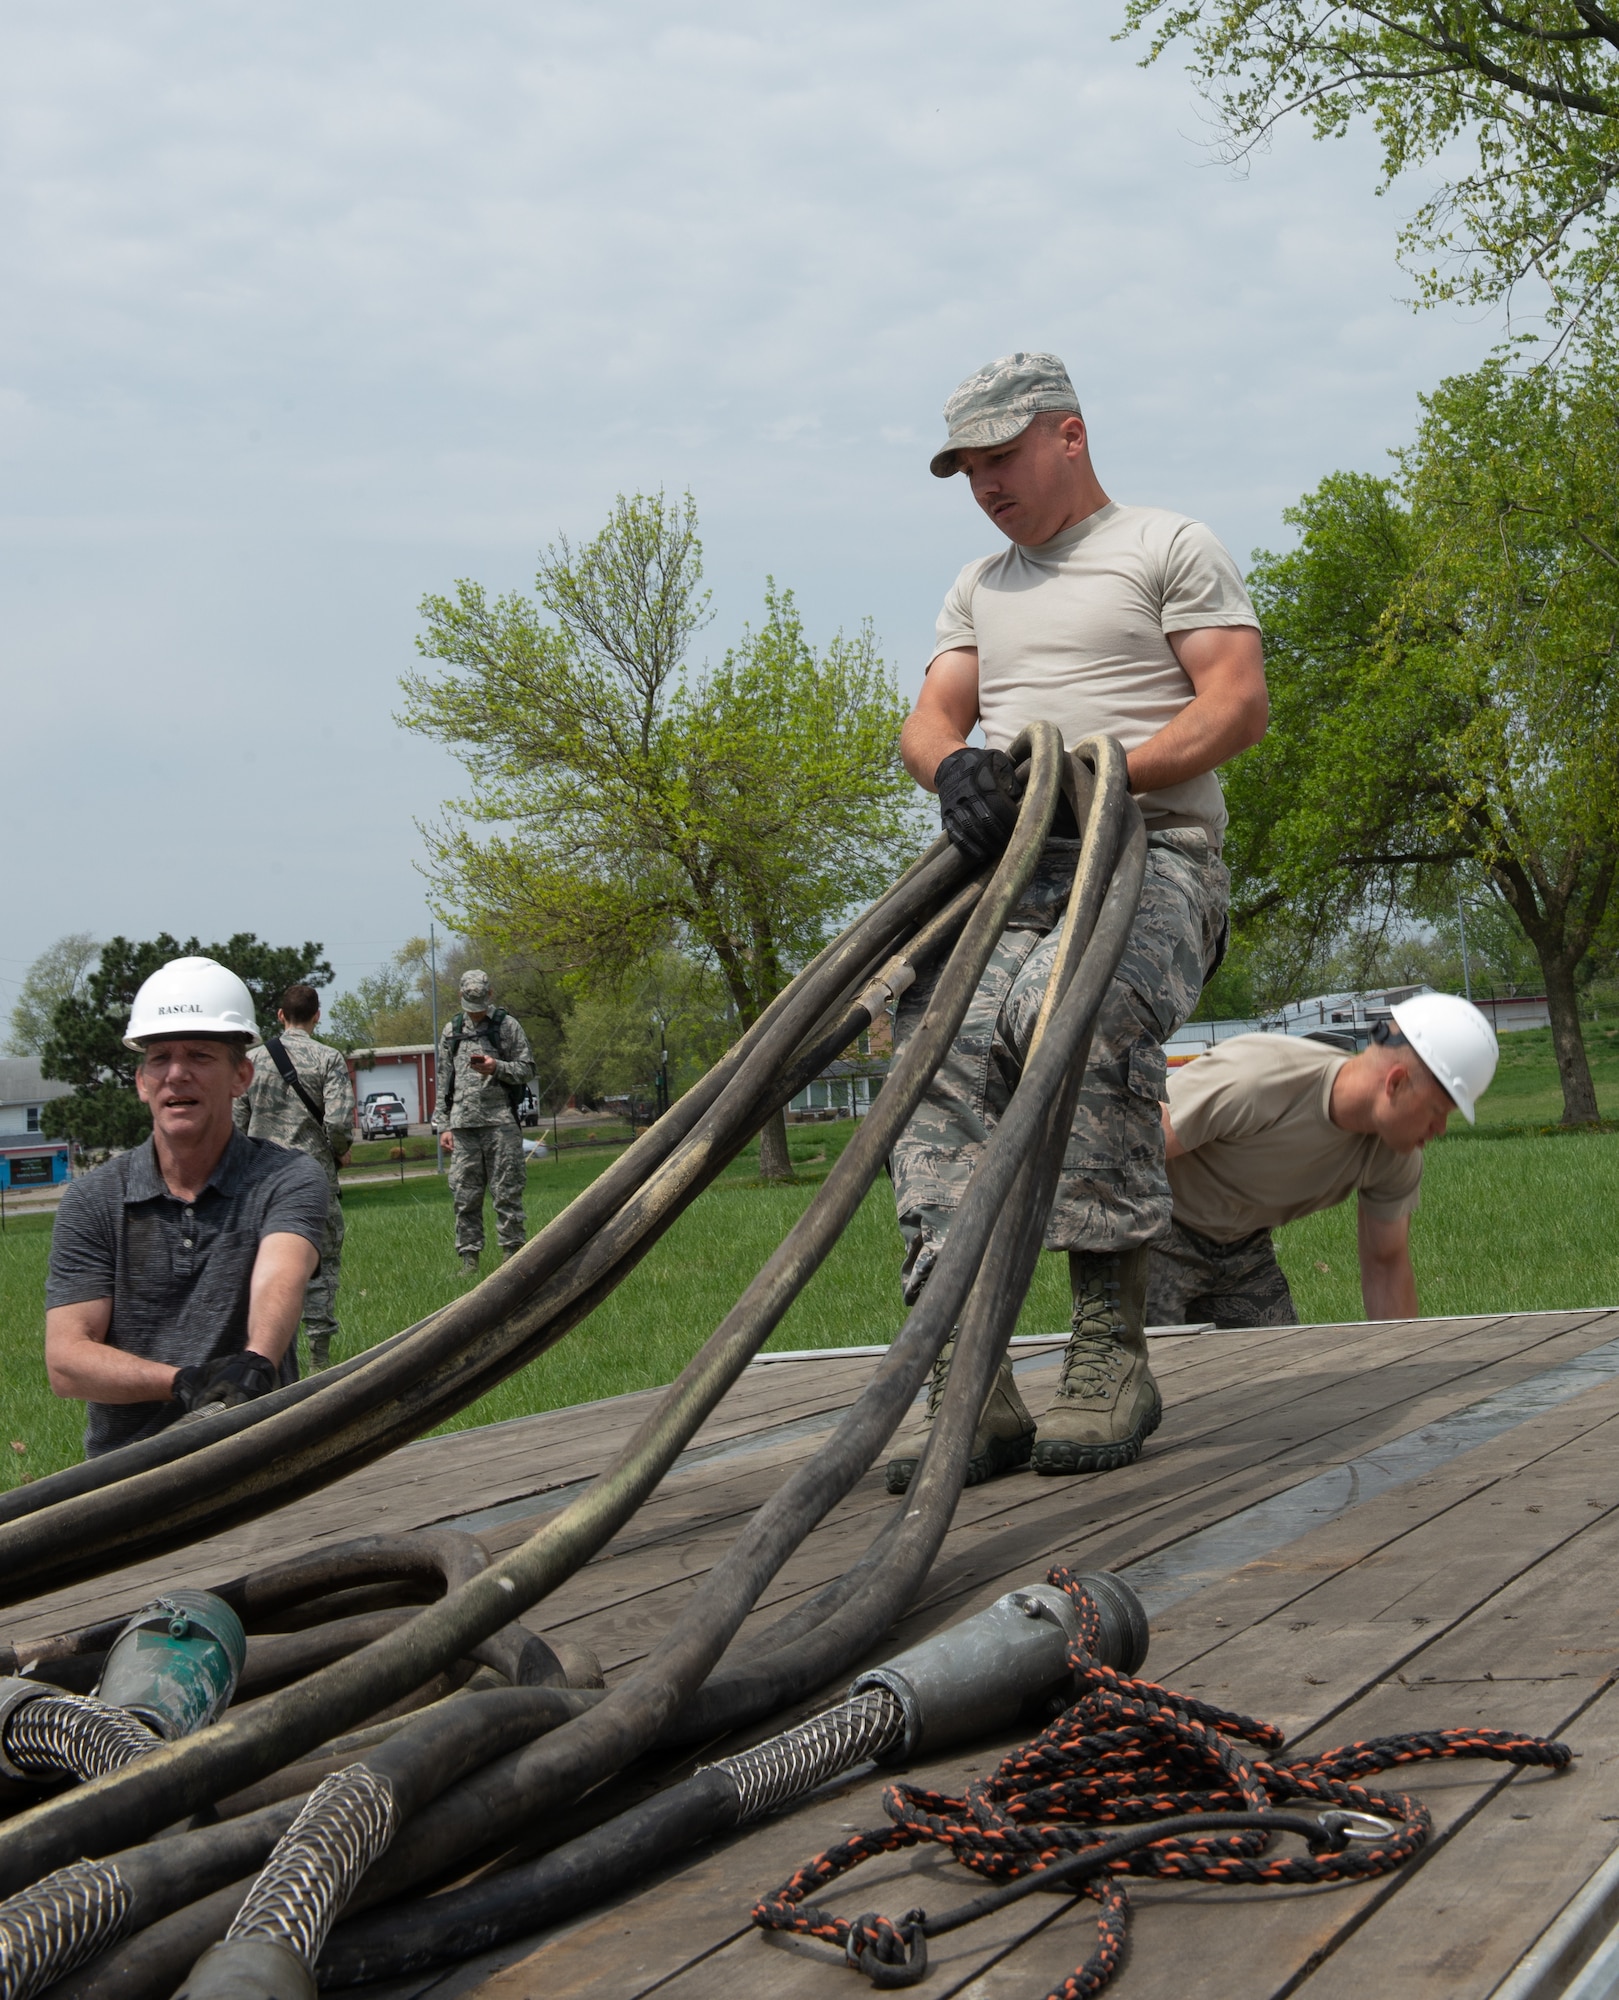 Airmen assigned to the 4th Component Maintenance Squadron at Seymour Johnson Air Force Base, North Carolina, unload power cables for the Rapid Assistance Support for Calibration unit May 6, 2019, at Offutt Air Force Base, Nebraska. PMEL is responsible for calibrating electronic, mechanical and physical dimensional test equipment in order to meet laboratory standards that are traceable to the National Institute of Standards. (U.S. Air Force photo by L. Cunningham)